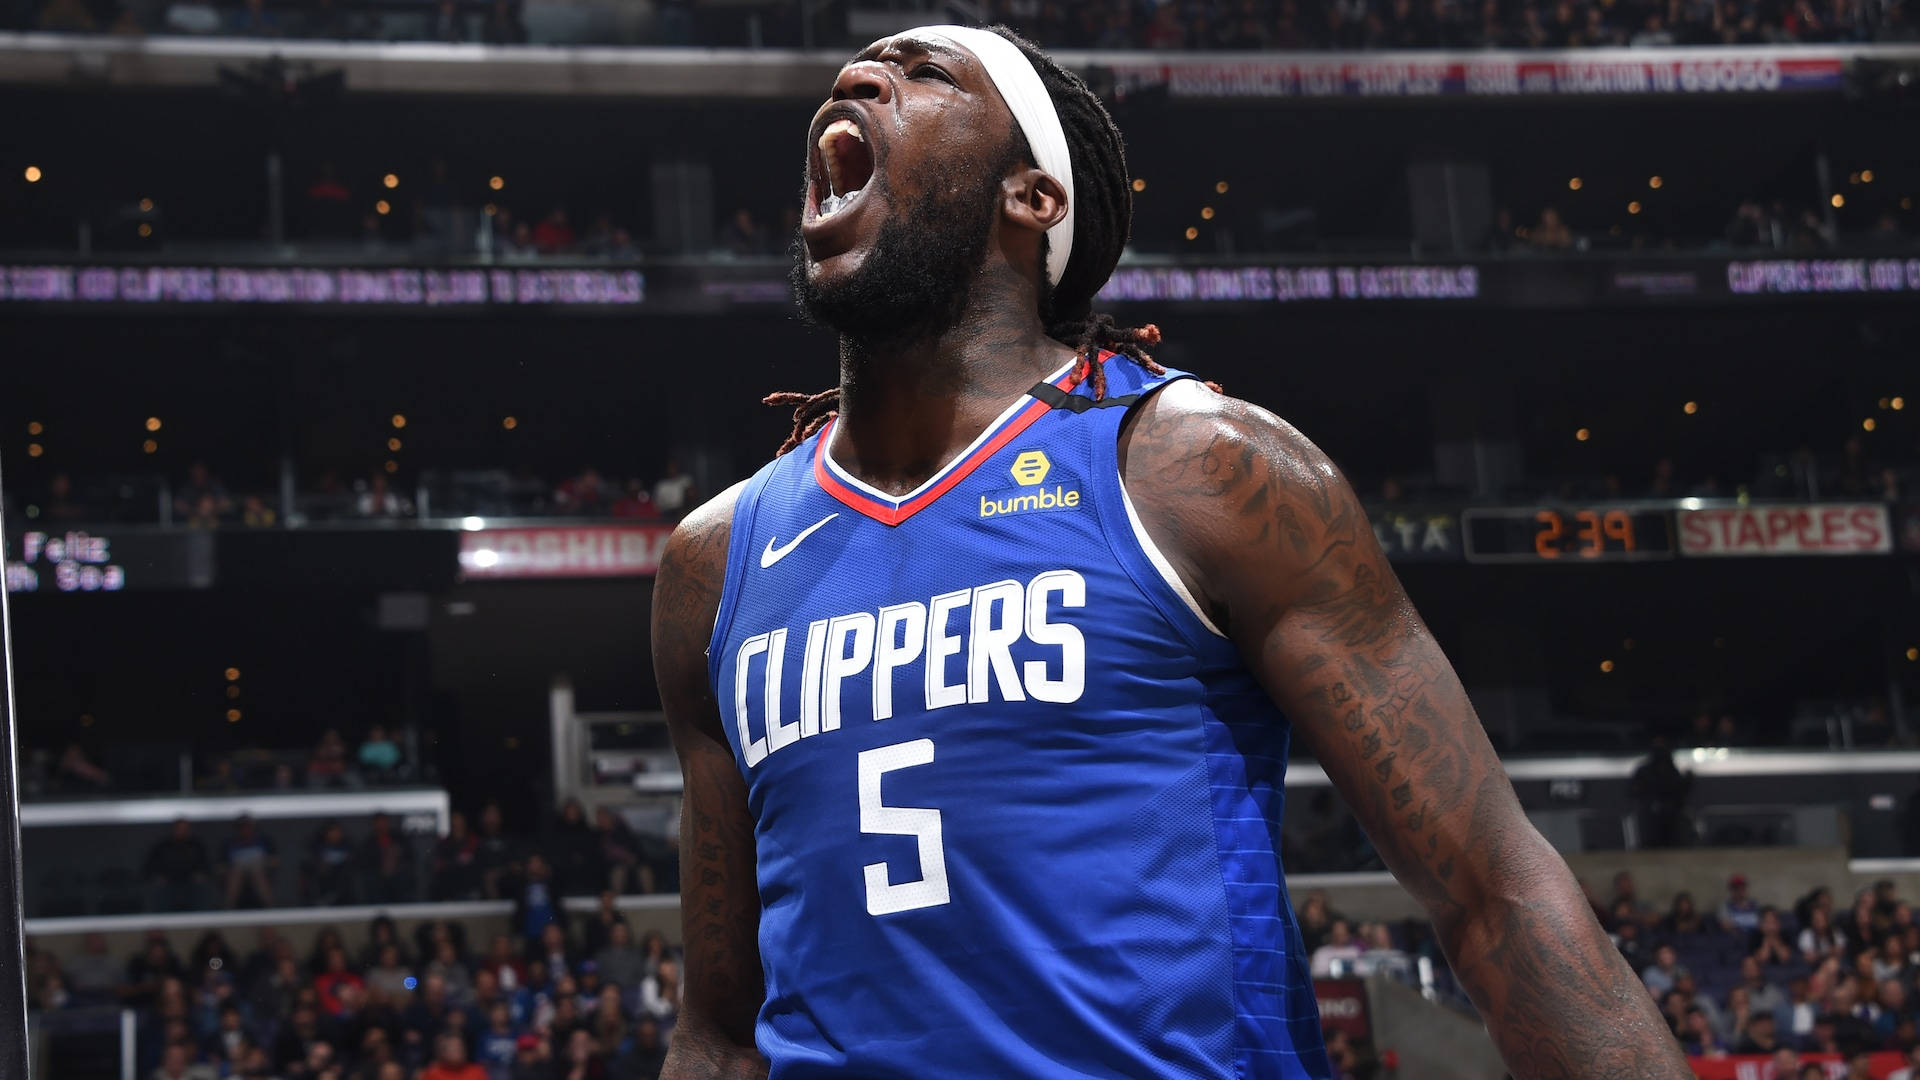 Clippers Montrezl Harrell Screaming On Court Wallpaper